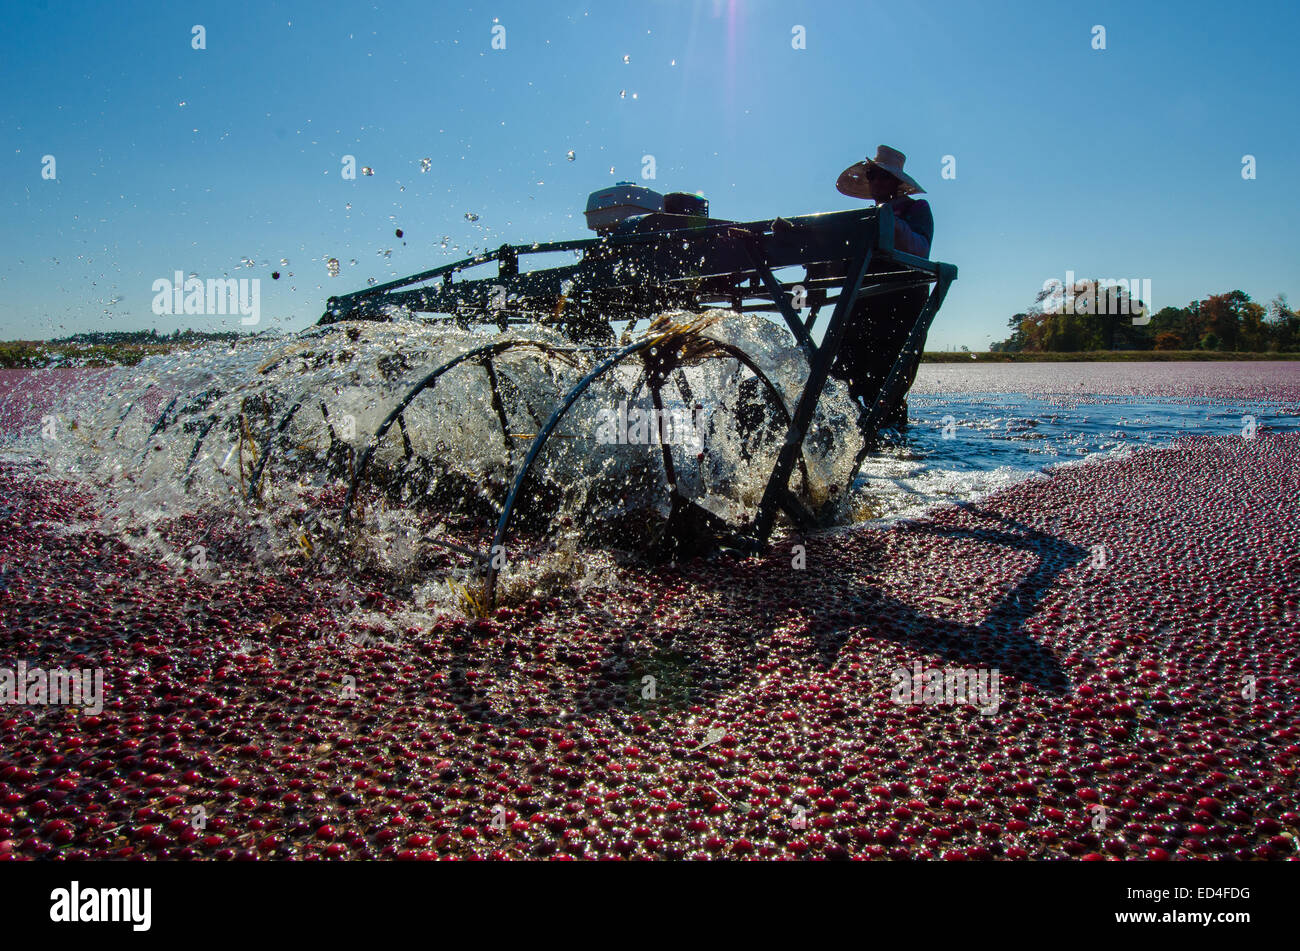 Water reels or 'egg beaters' remove the cranberries from their vines and allow for the water harvesting of the berries. Stock Photo